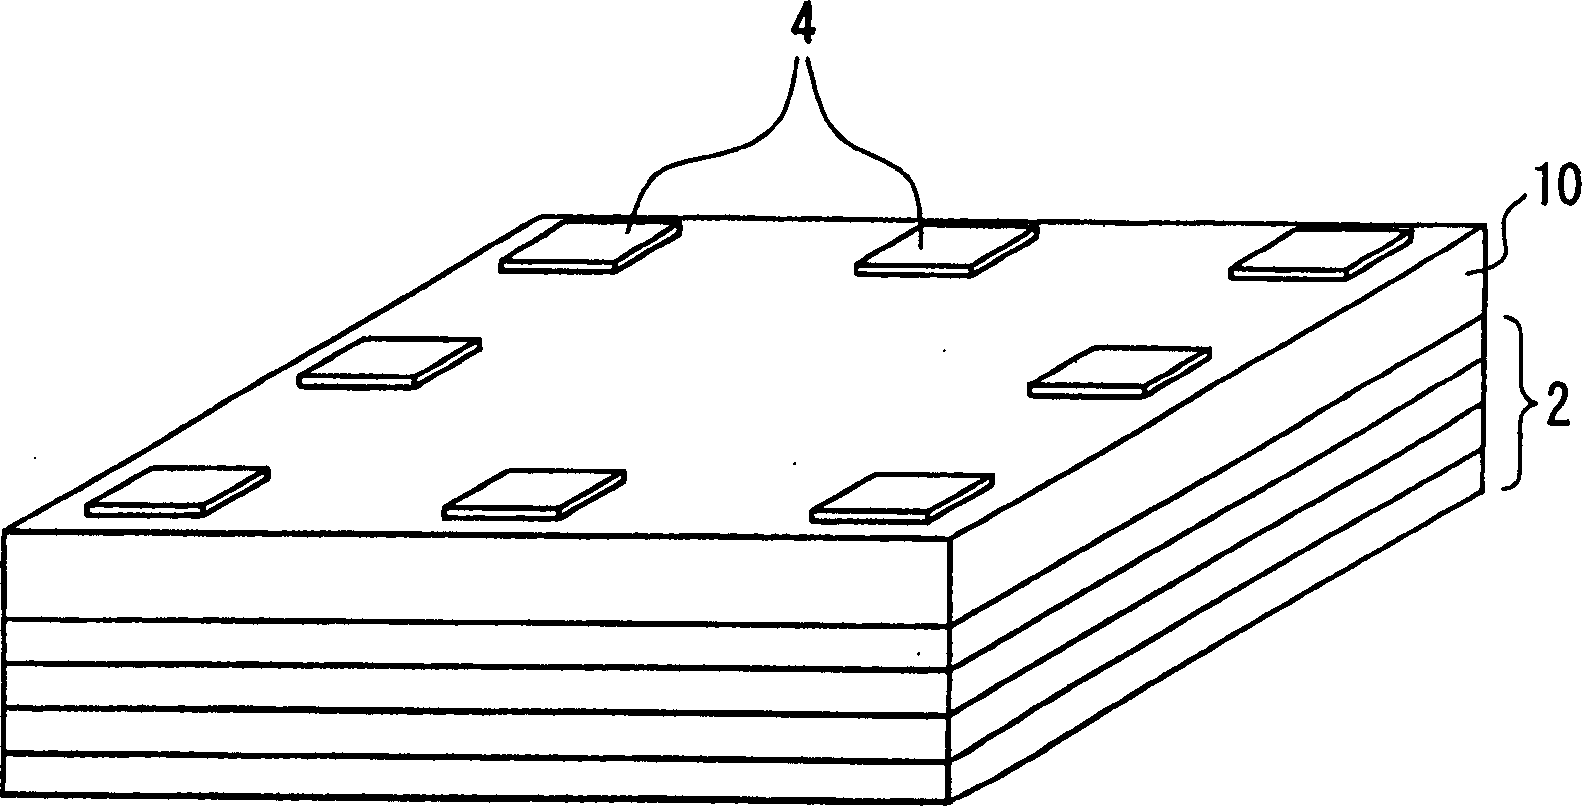 High frequency semiconductor device